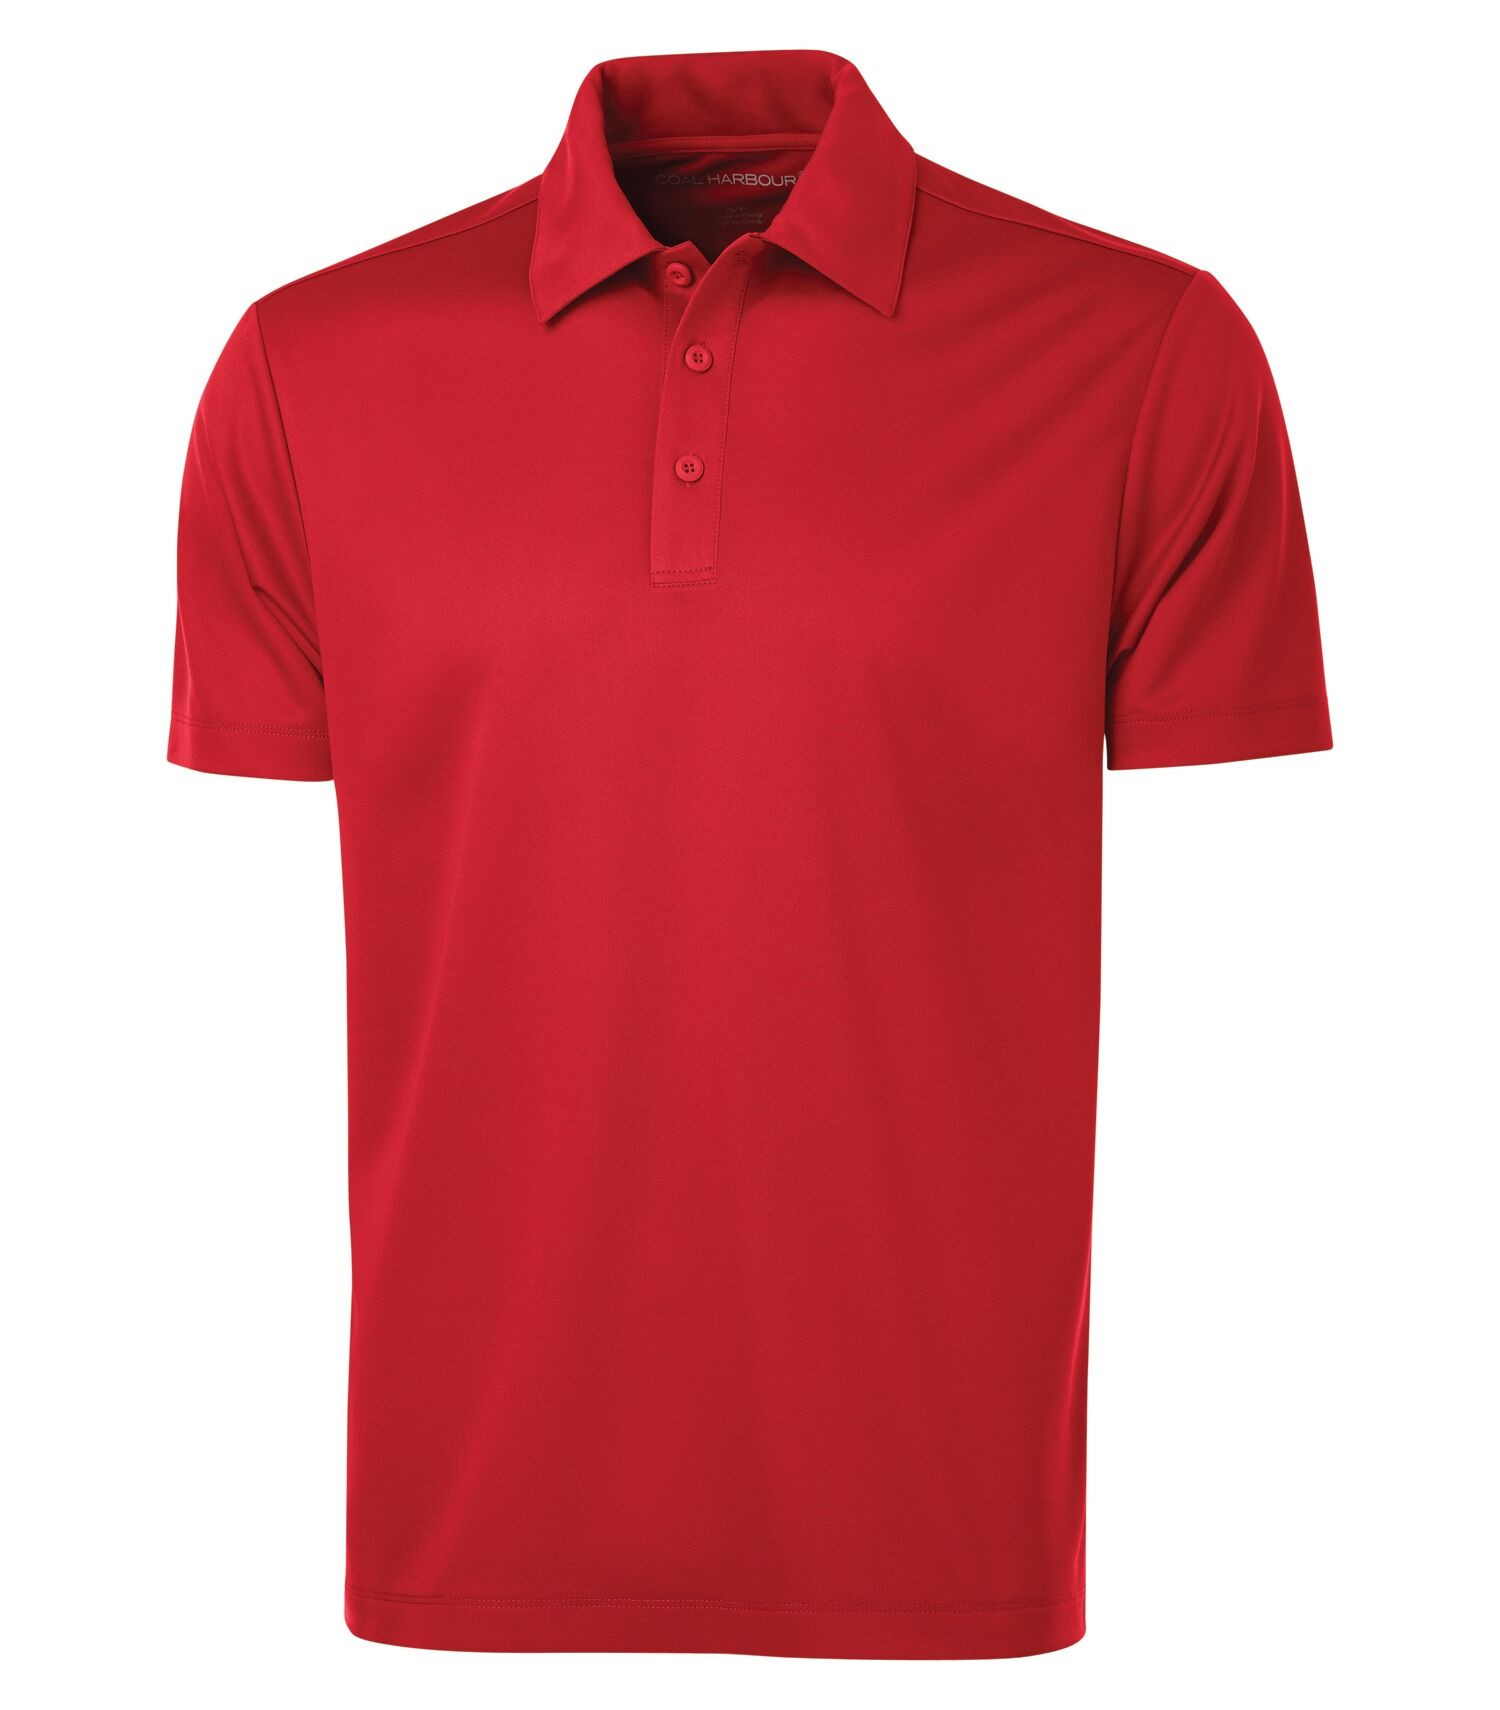 COAL HARBOUR EVERYDAY SPORT SHIRT #S4007 Red